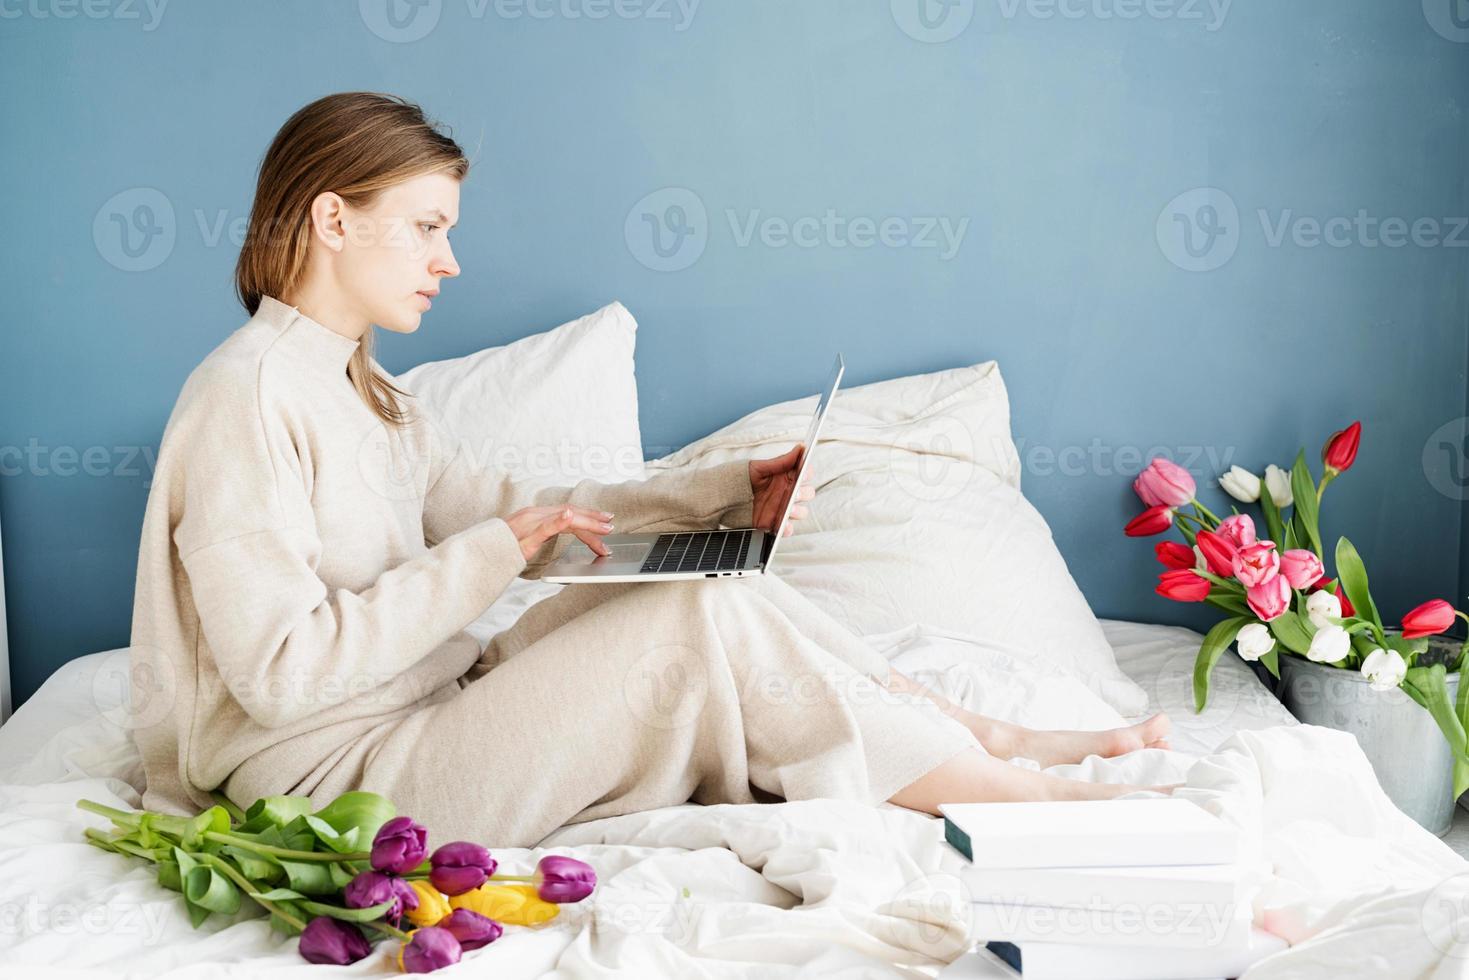 woman sitting on the bed wearing pajamas bouquet chatting on laptop photo